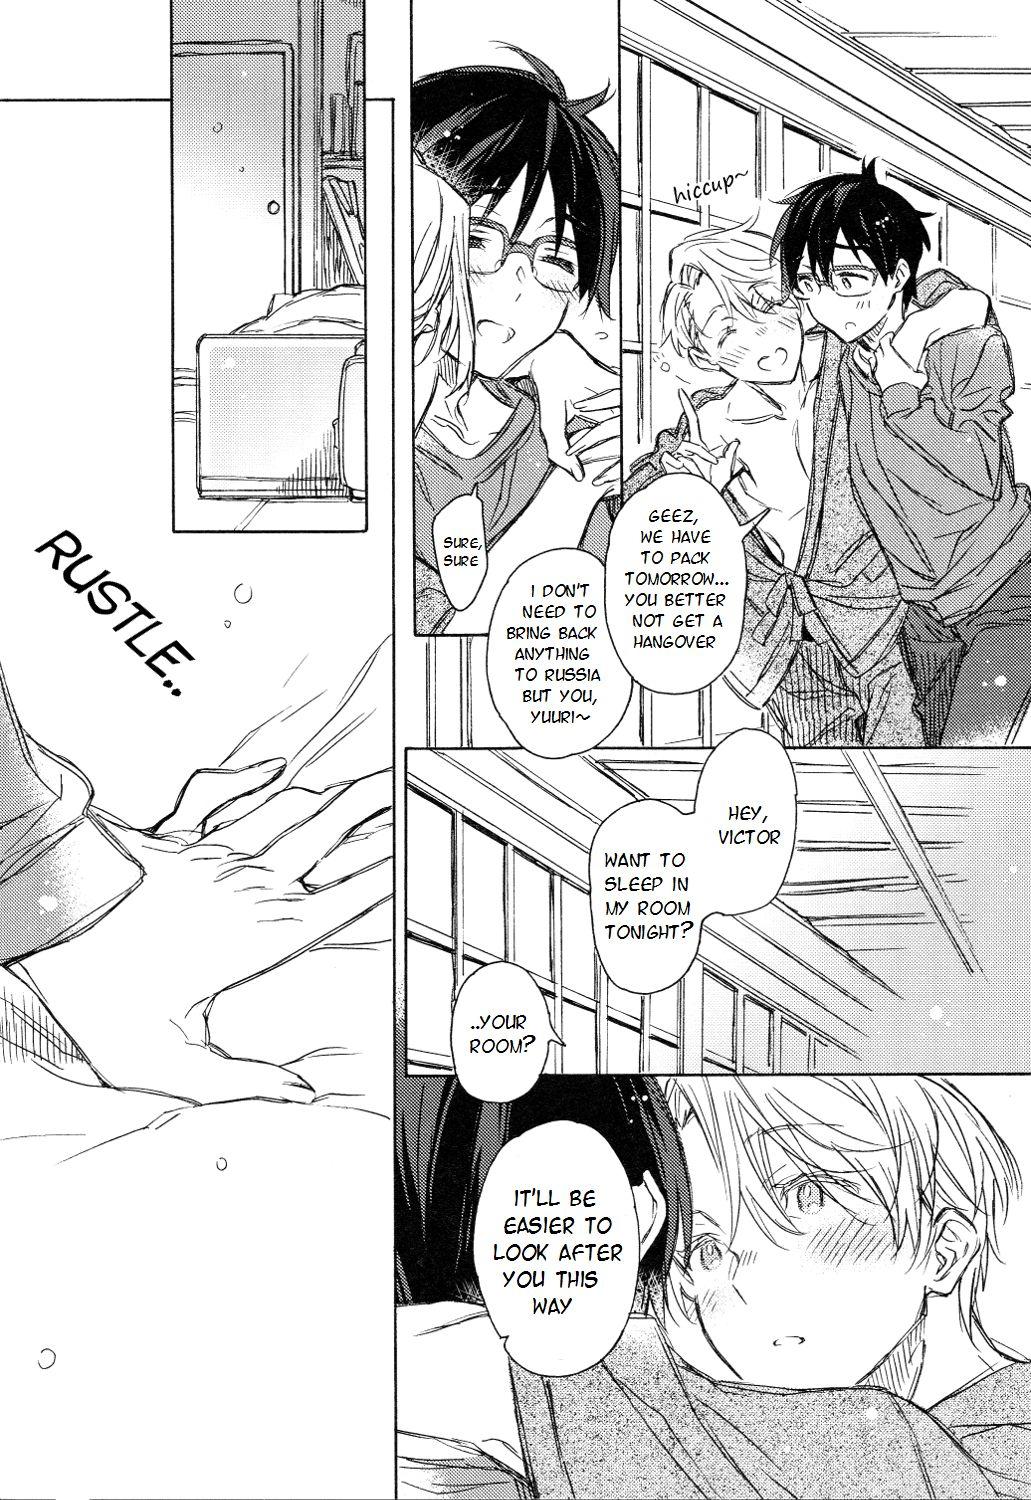 Livesex BRAND NEW DAY,BRAND NEW LIFE - Yuri on ice Thailand - Page 7